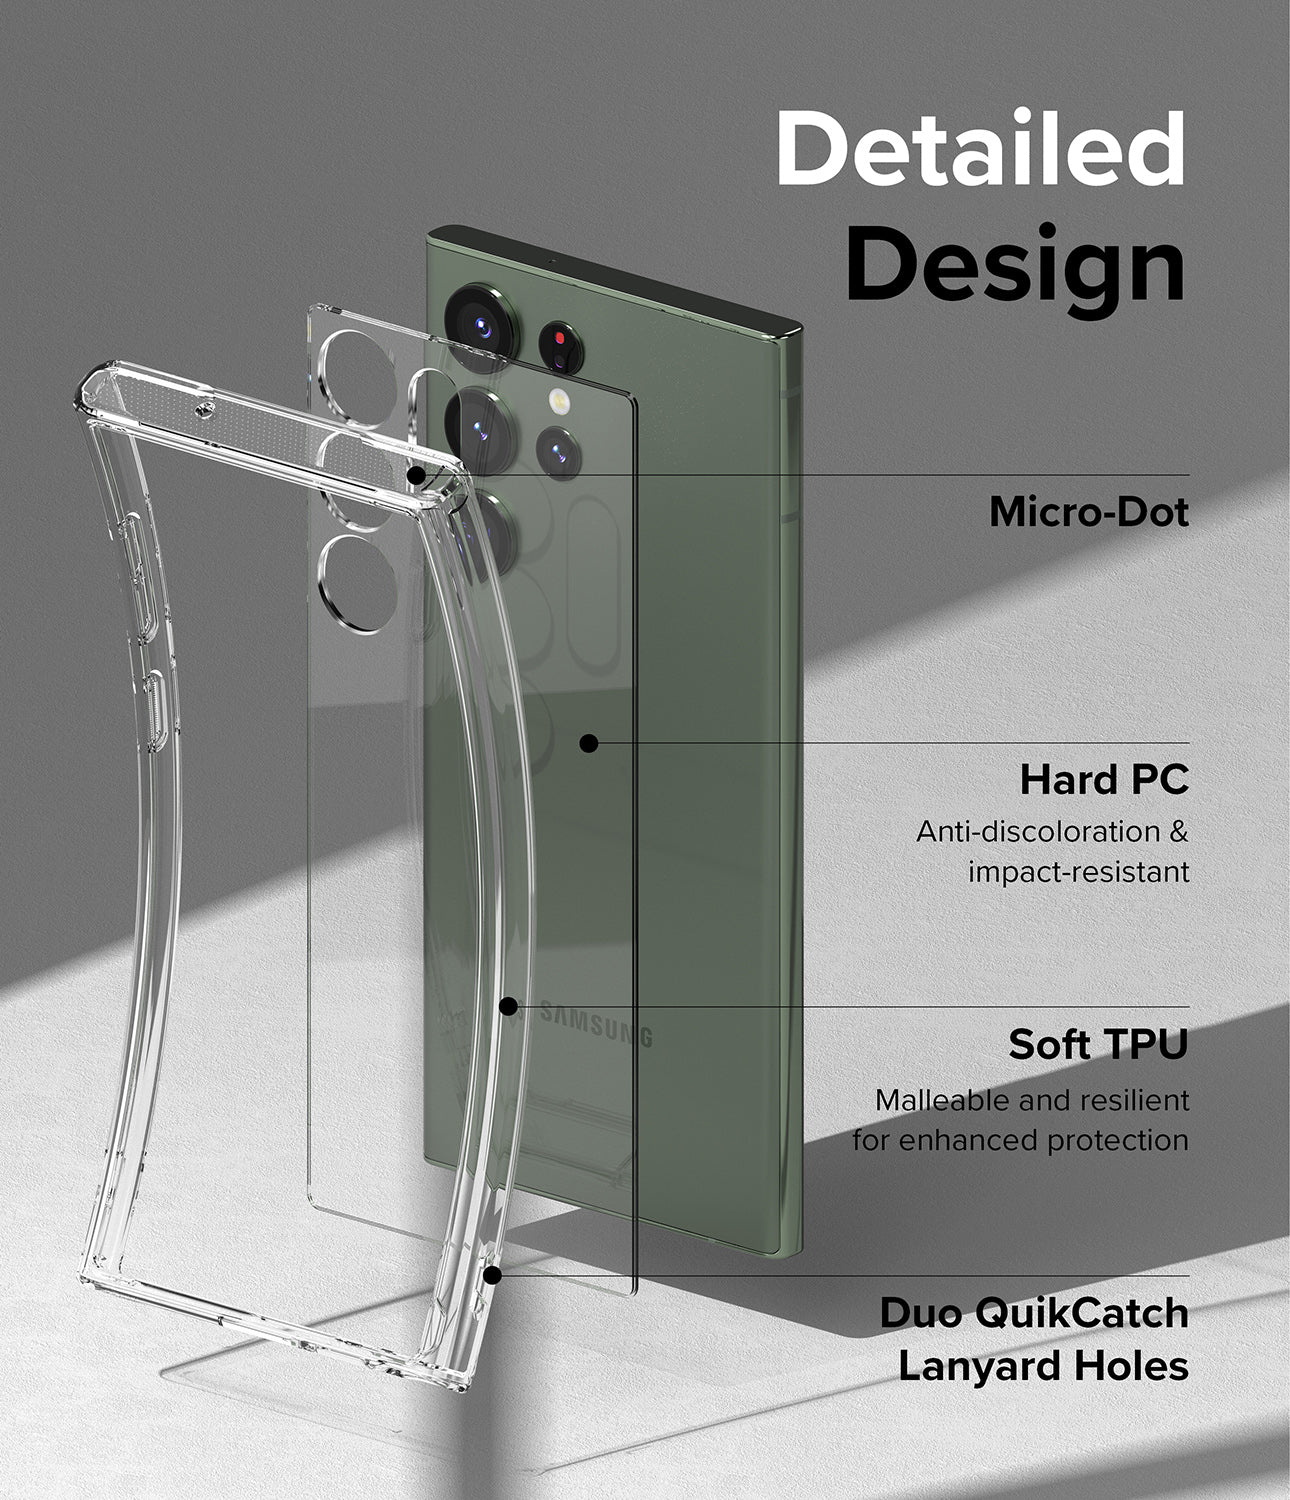 Galaxy S23 Ultra Case | Fusion - Clear - Detailed Design. Micro-Dot. Anti-discoloration and impact-resistant with Hard PC. Malleable and resilient for enhanced protection with Soft TPU. Duo QuikCatch Lanyard Holes